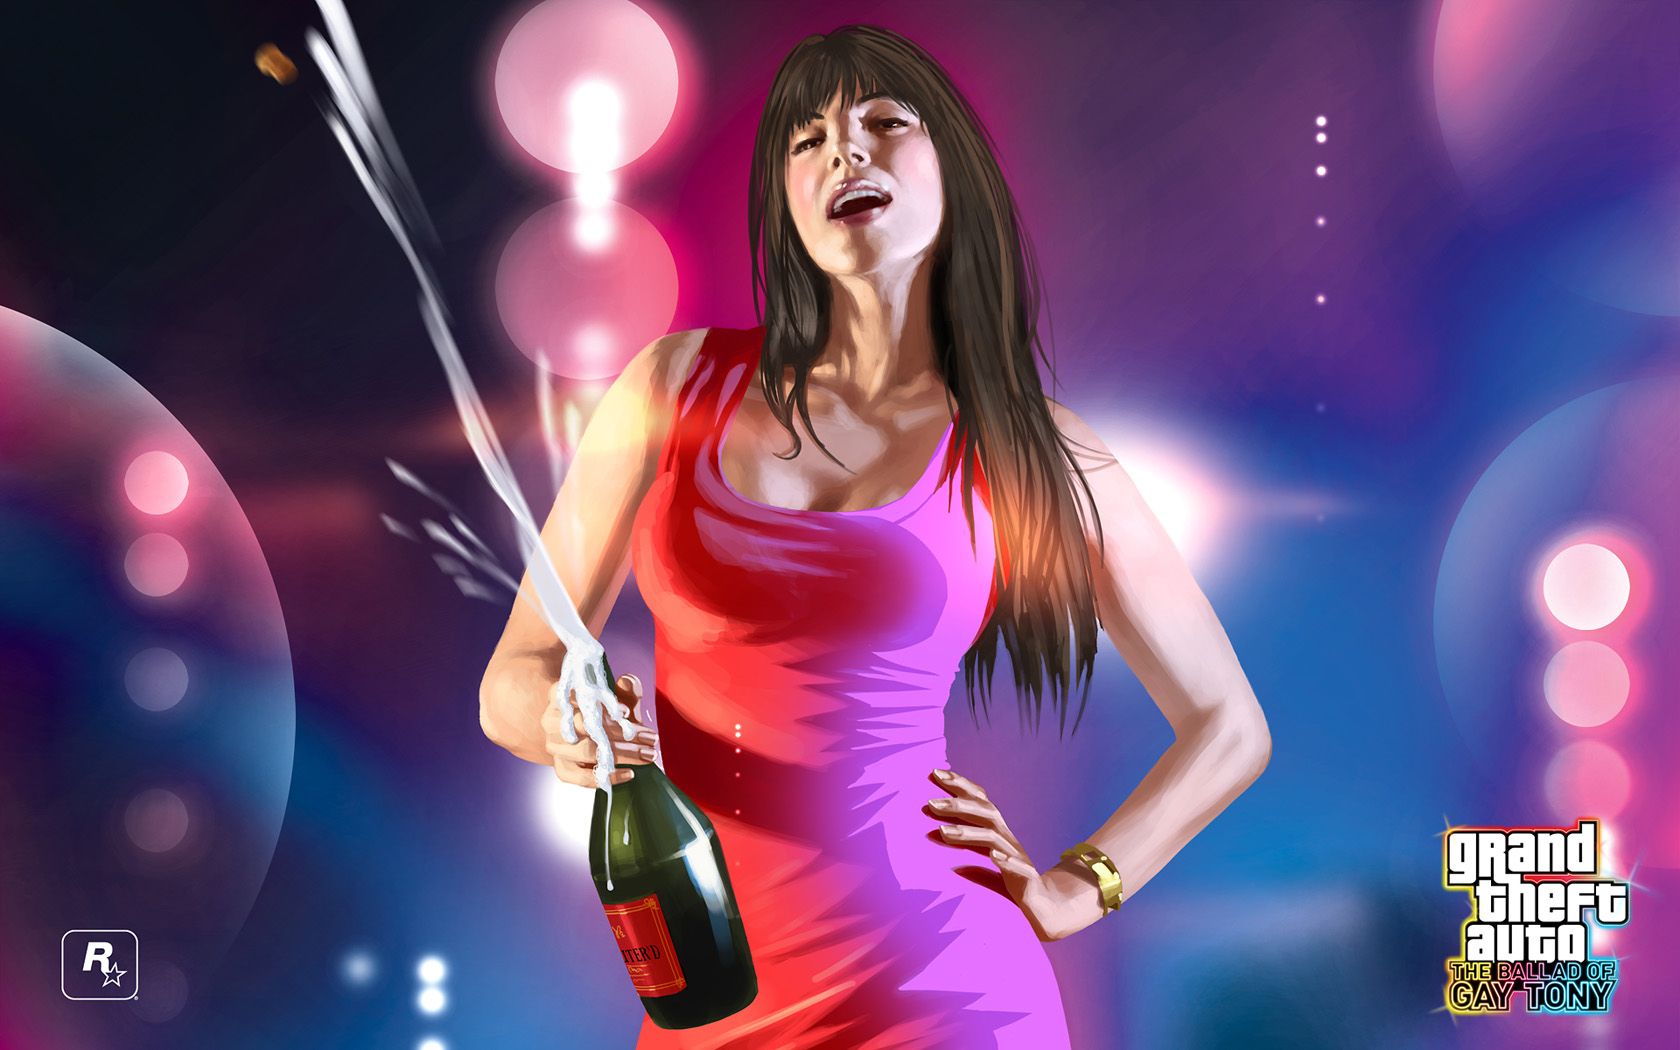 women, Video games, Grand Theft Auto V, Champagne, Pink dress